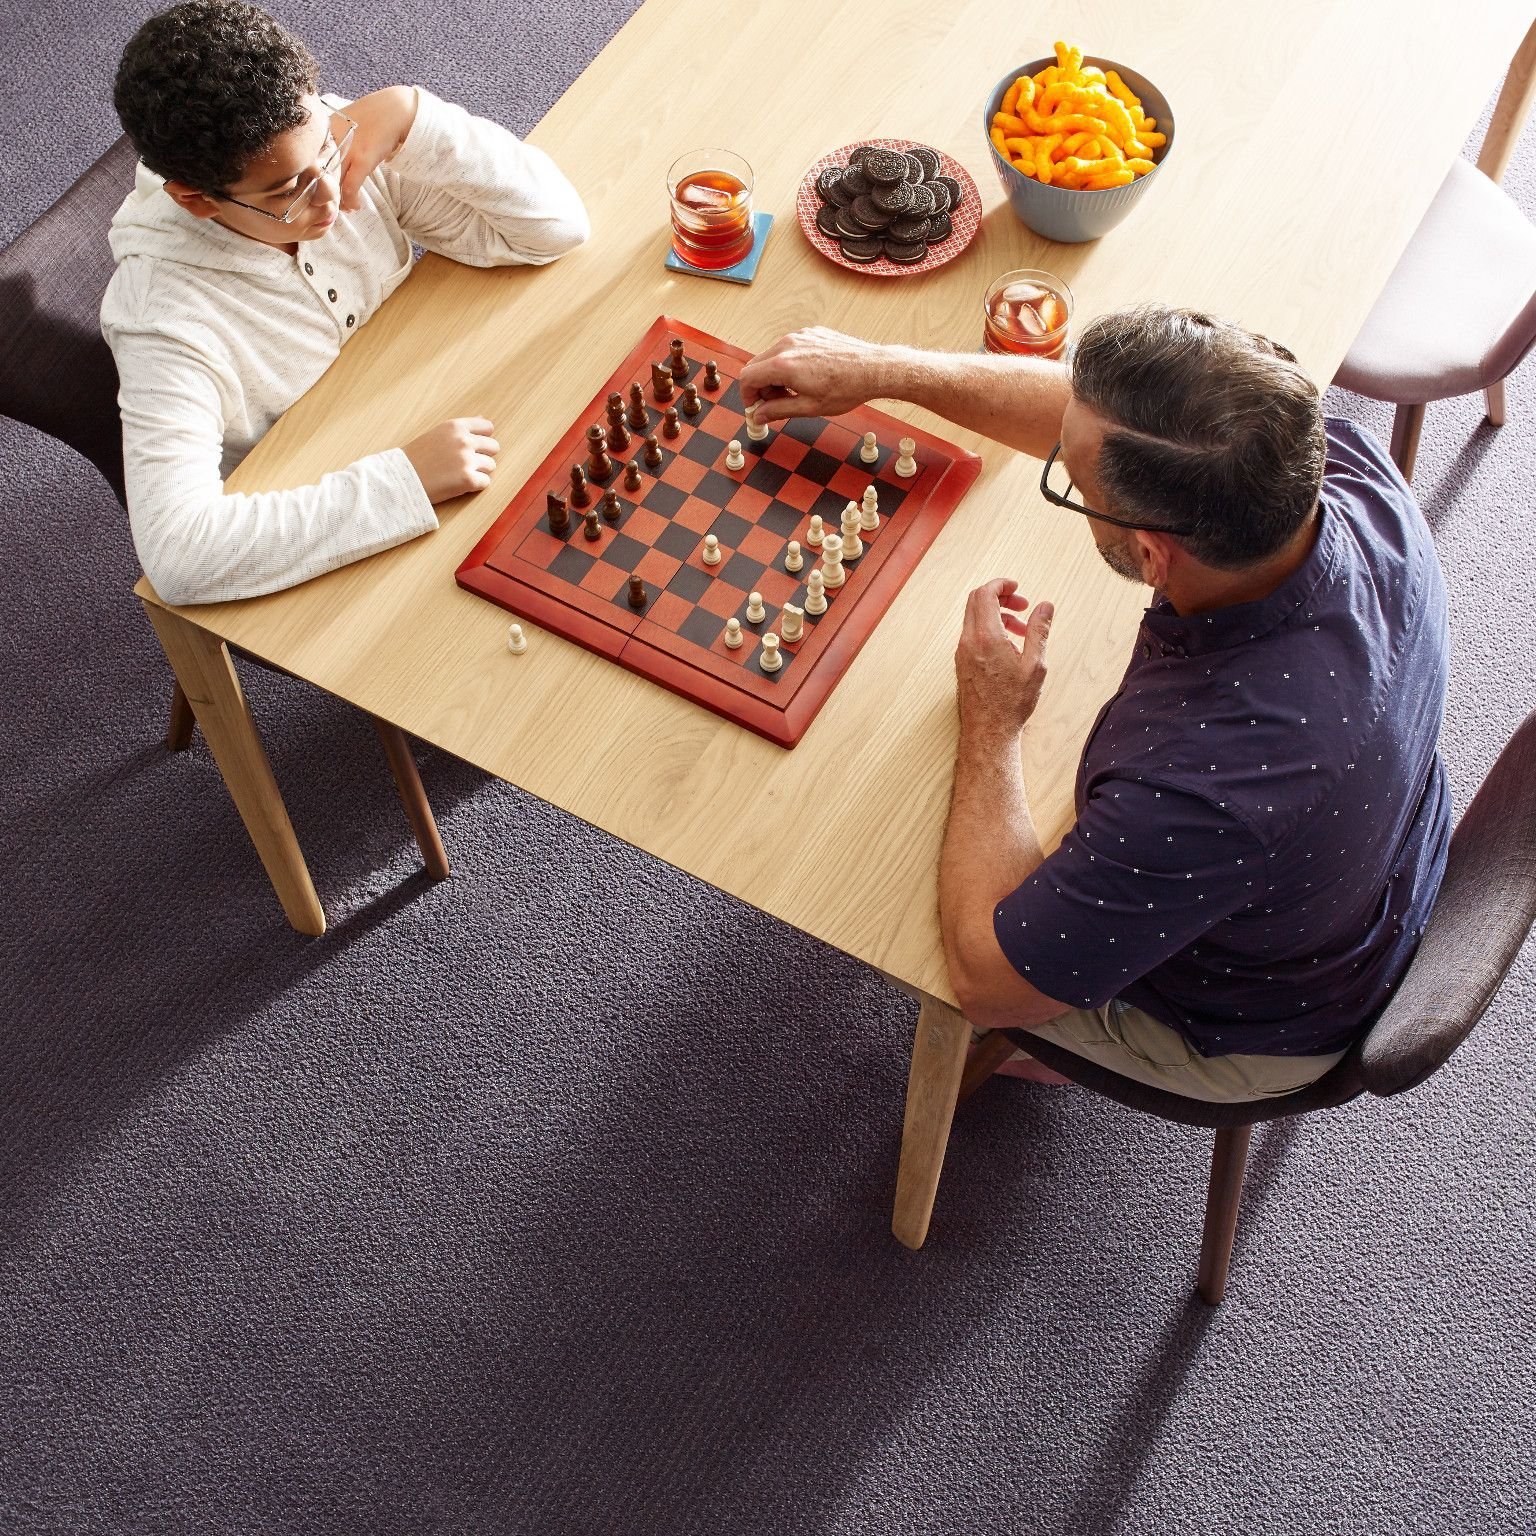 Father and son playing chess at a wooden table in a room with purple carpet from Simonian Flooring Inc in Village, NV